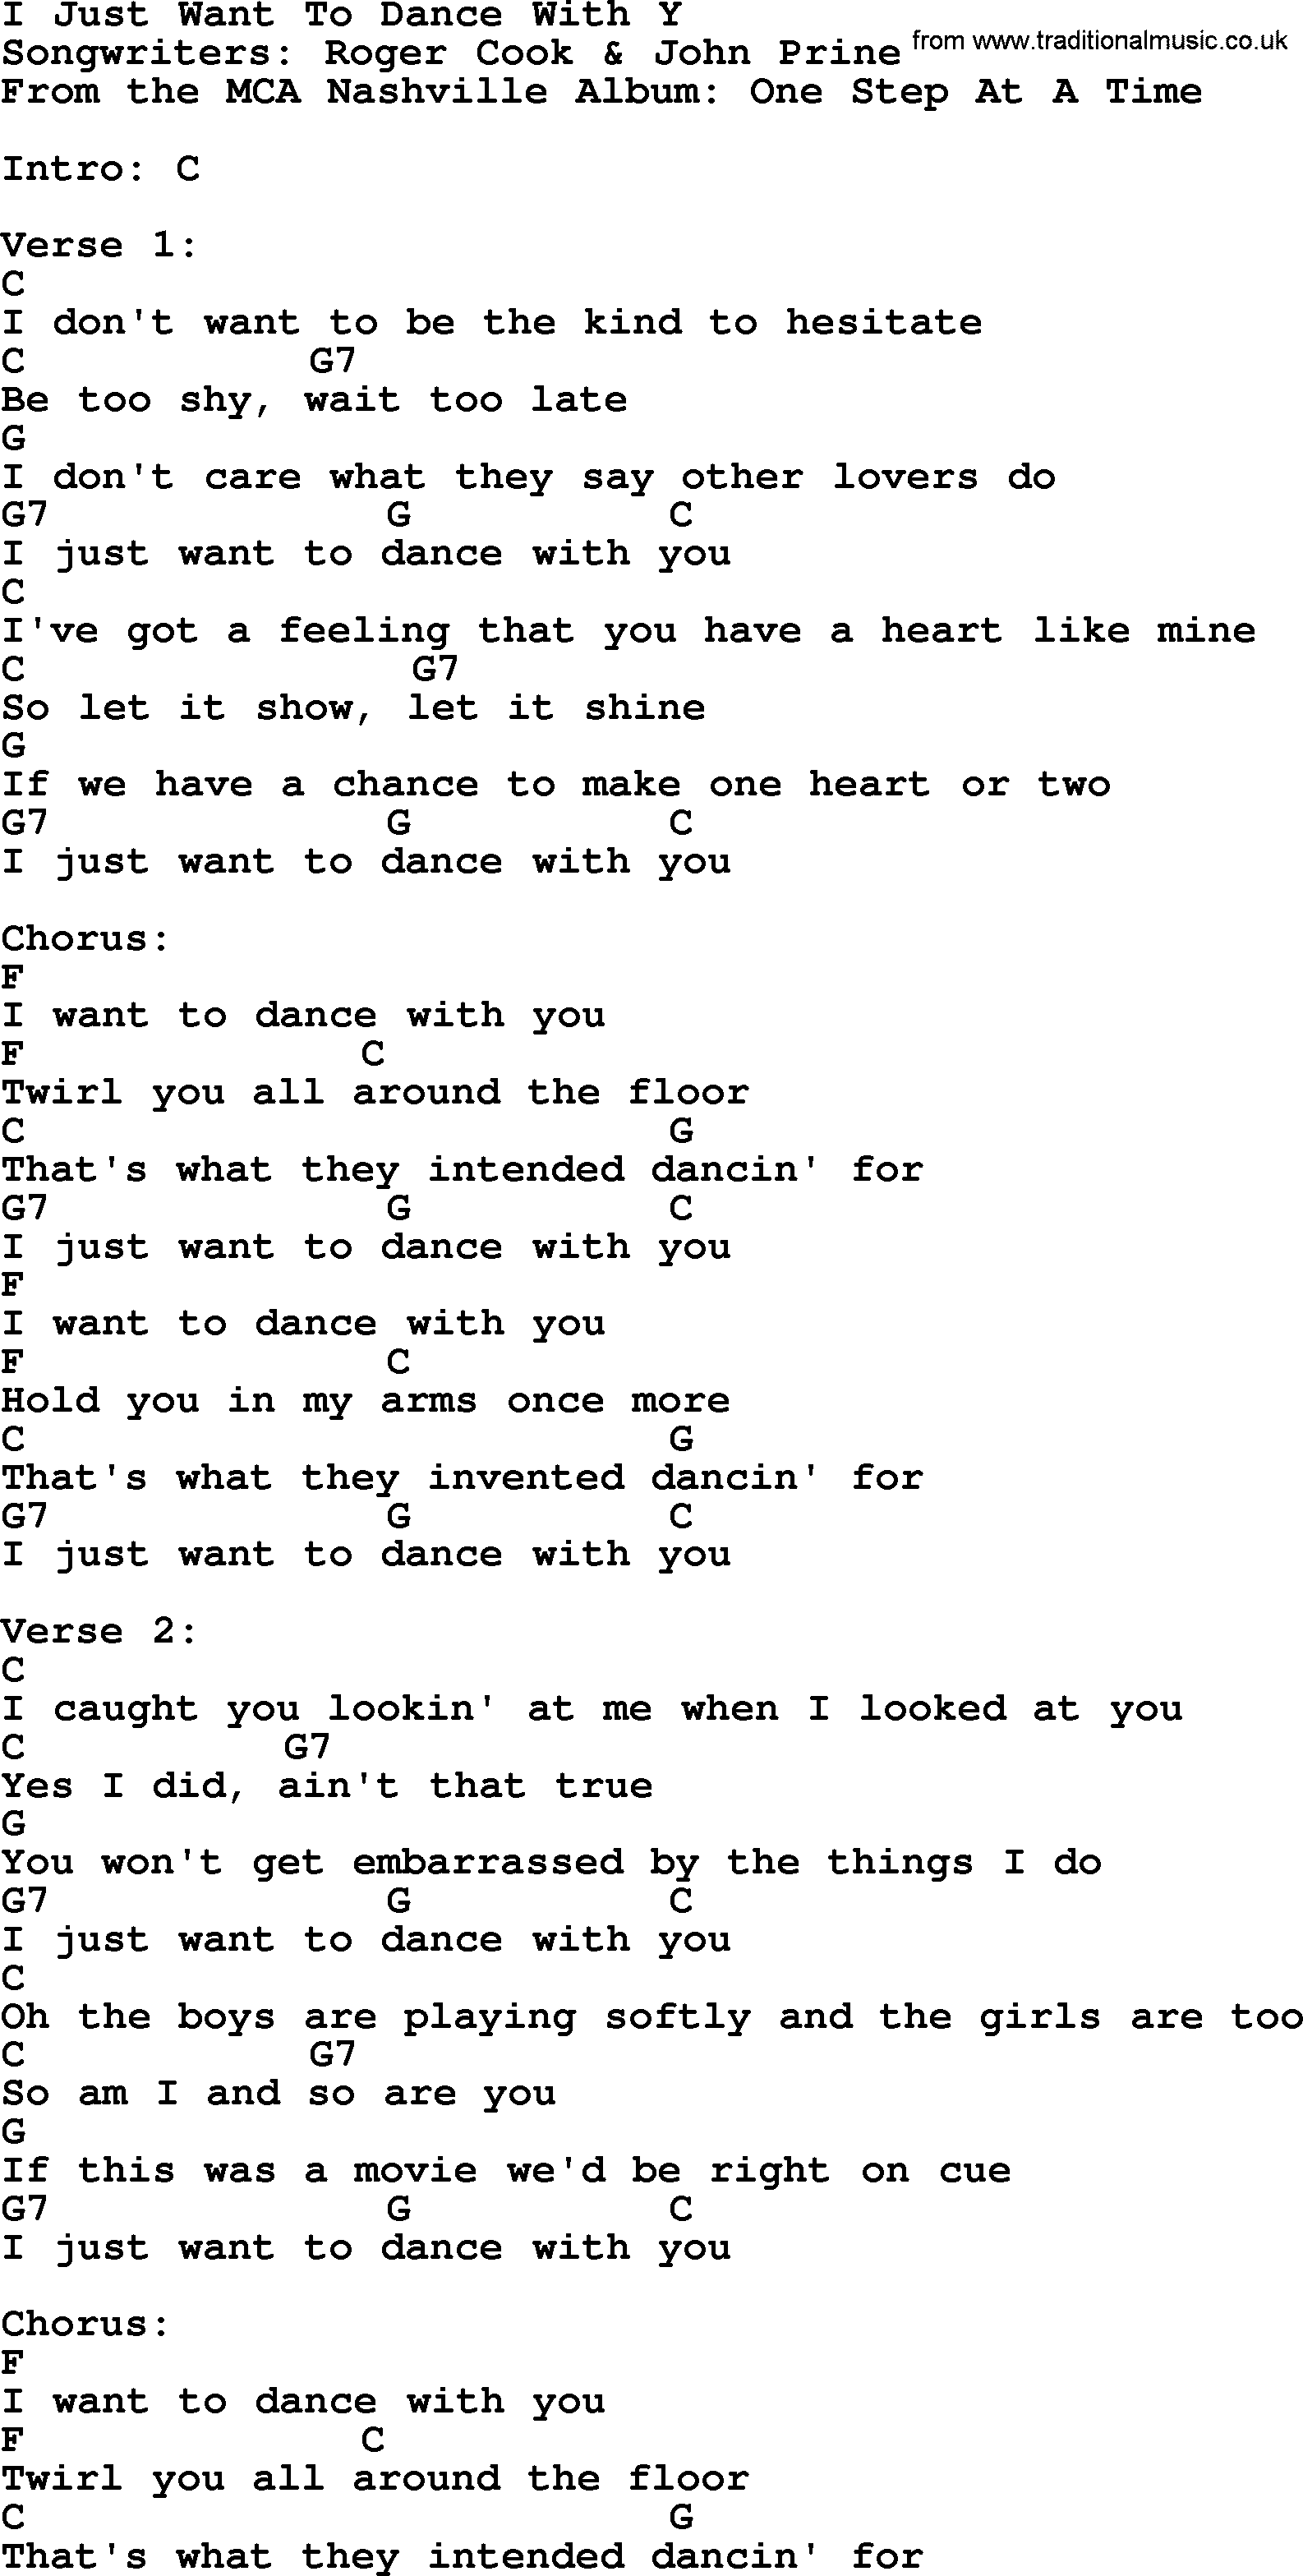 George Strait song: I Just Want To Dance With Y, lyrics and chords